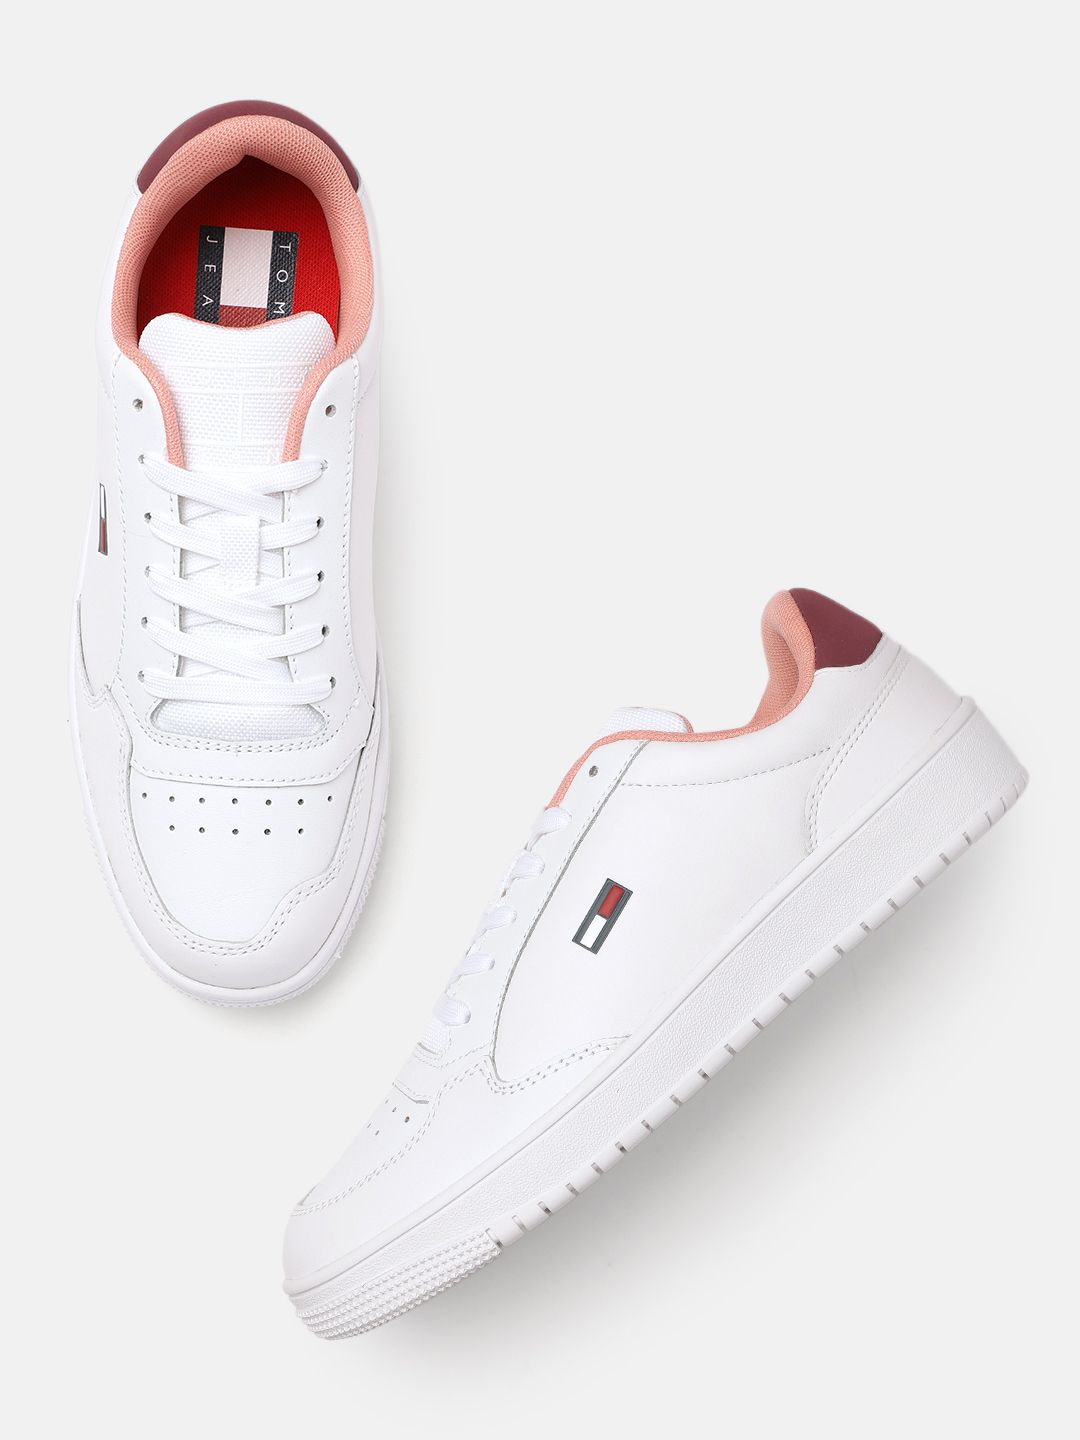 Tommy Hilfiger Women White Sneakers Price in India